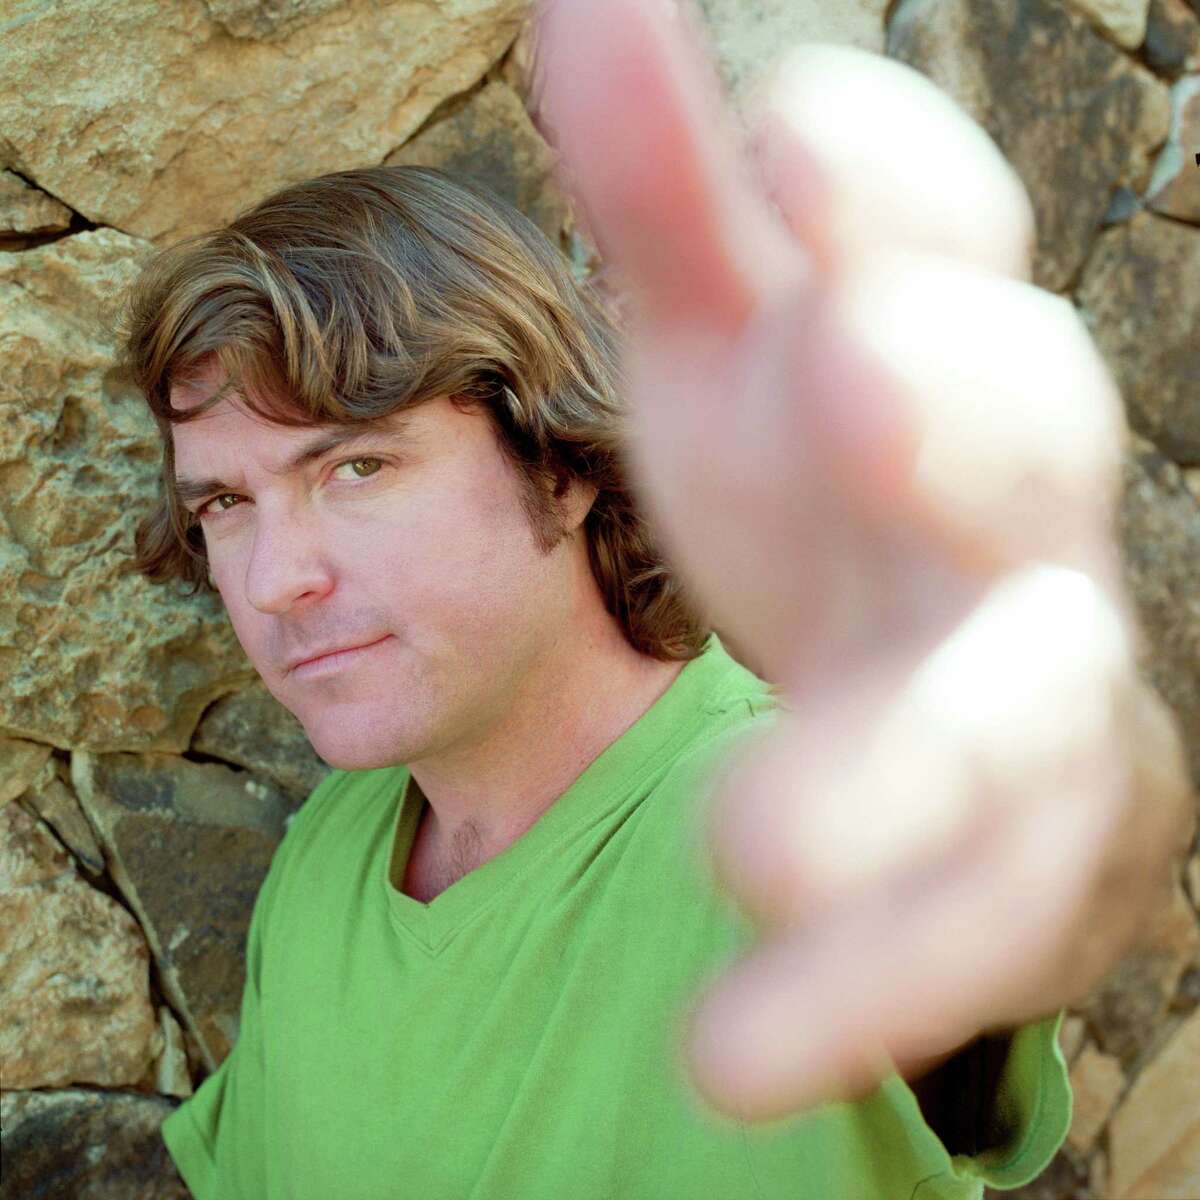 Singer-songwriter Keller Williams is a one-man jam band. He performs at The Ridgefield Playhouse on Thursday, May 2. "Keys," his 2013 release, showcases KellerâÄôs unique bluegrass folk, jazz and funk sounds.